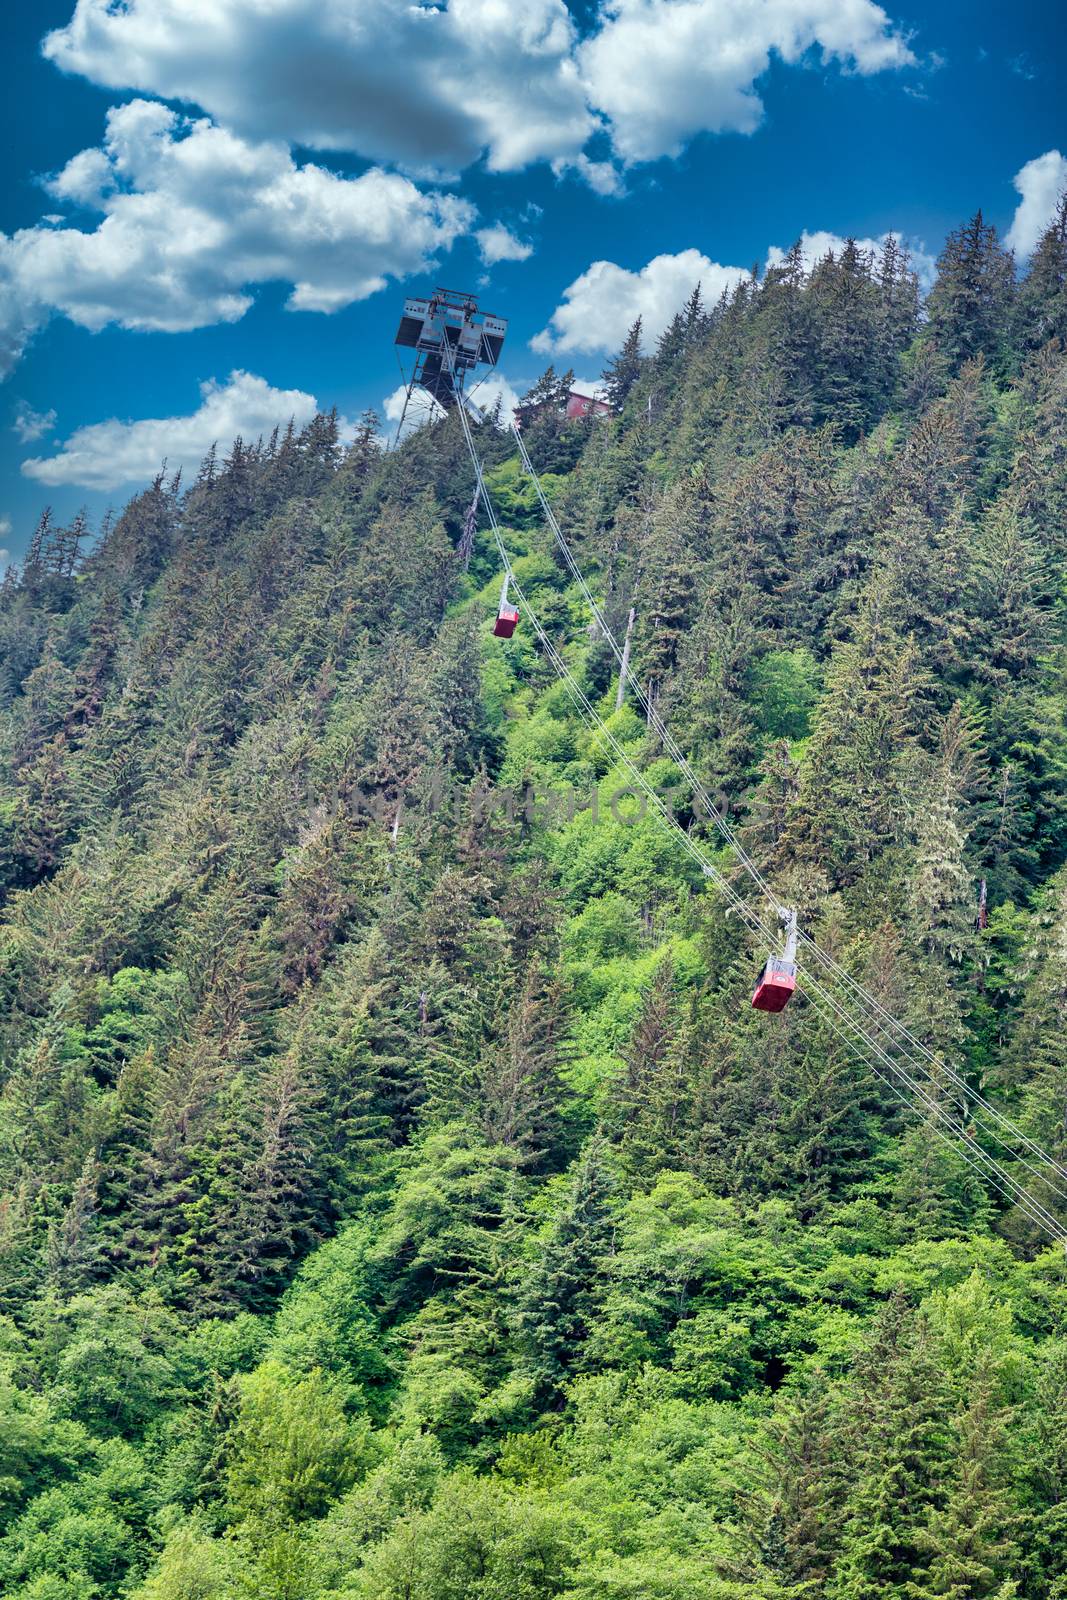 Juneau Cable Cars over Evergreens by dbvirago